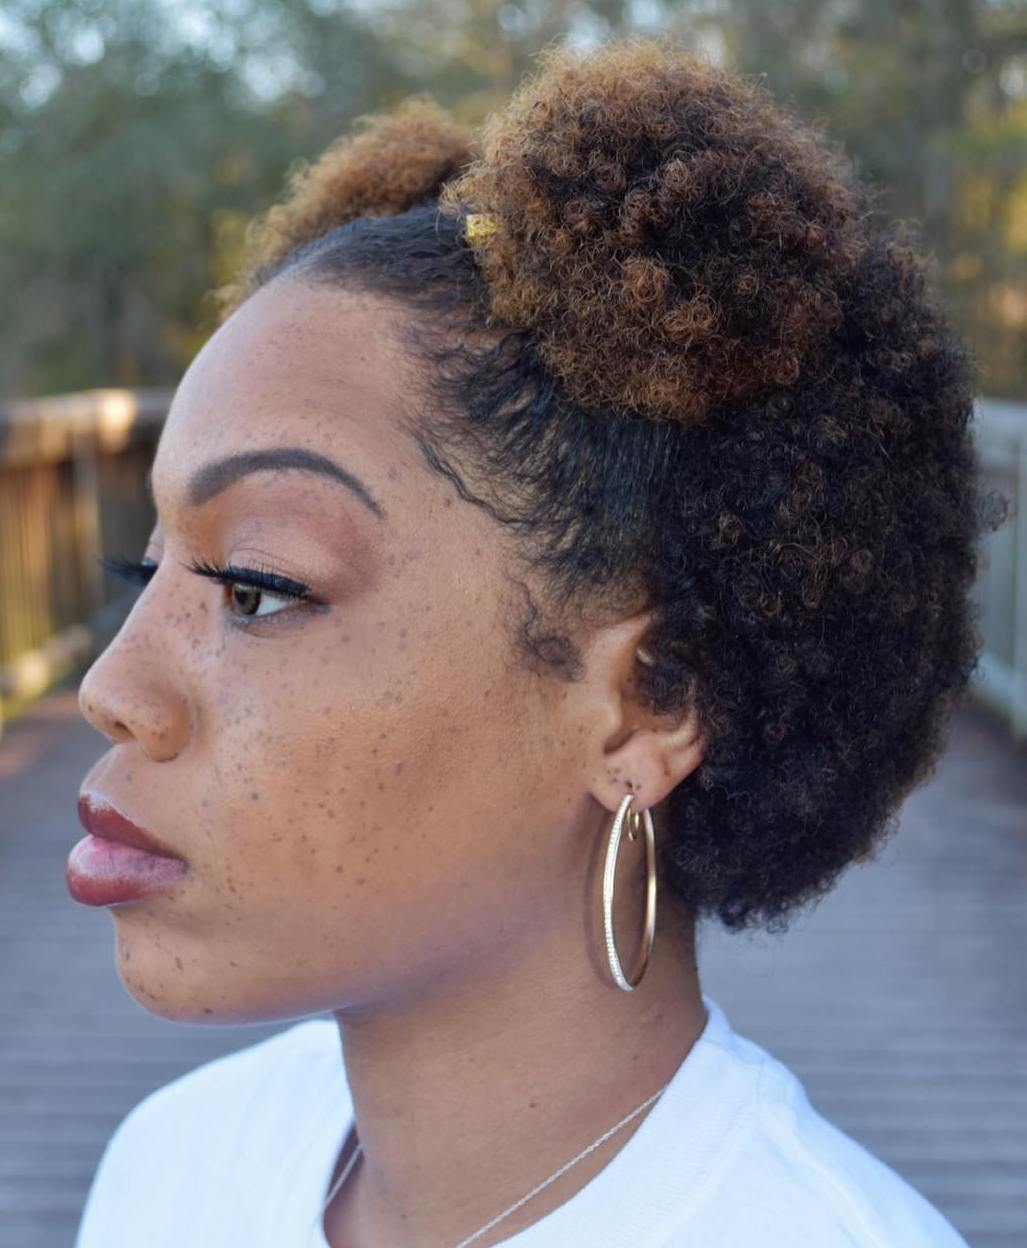 45 Classy Natural Hairstyles For Black Girls To Turn Heads In 2020